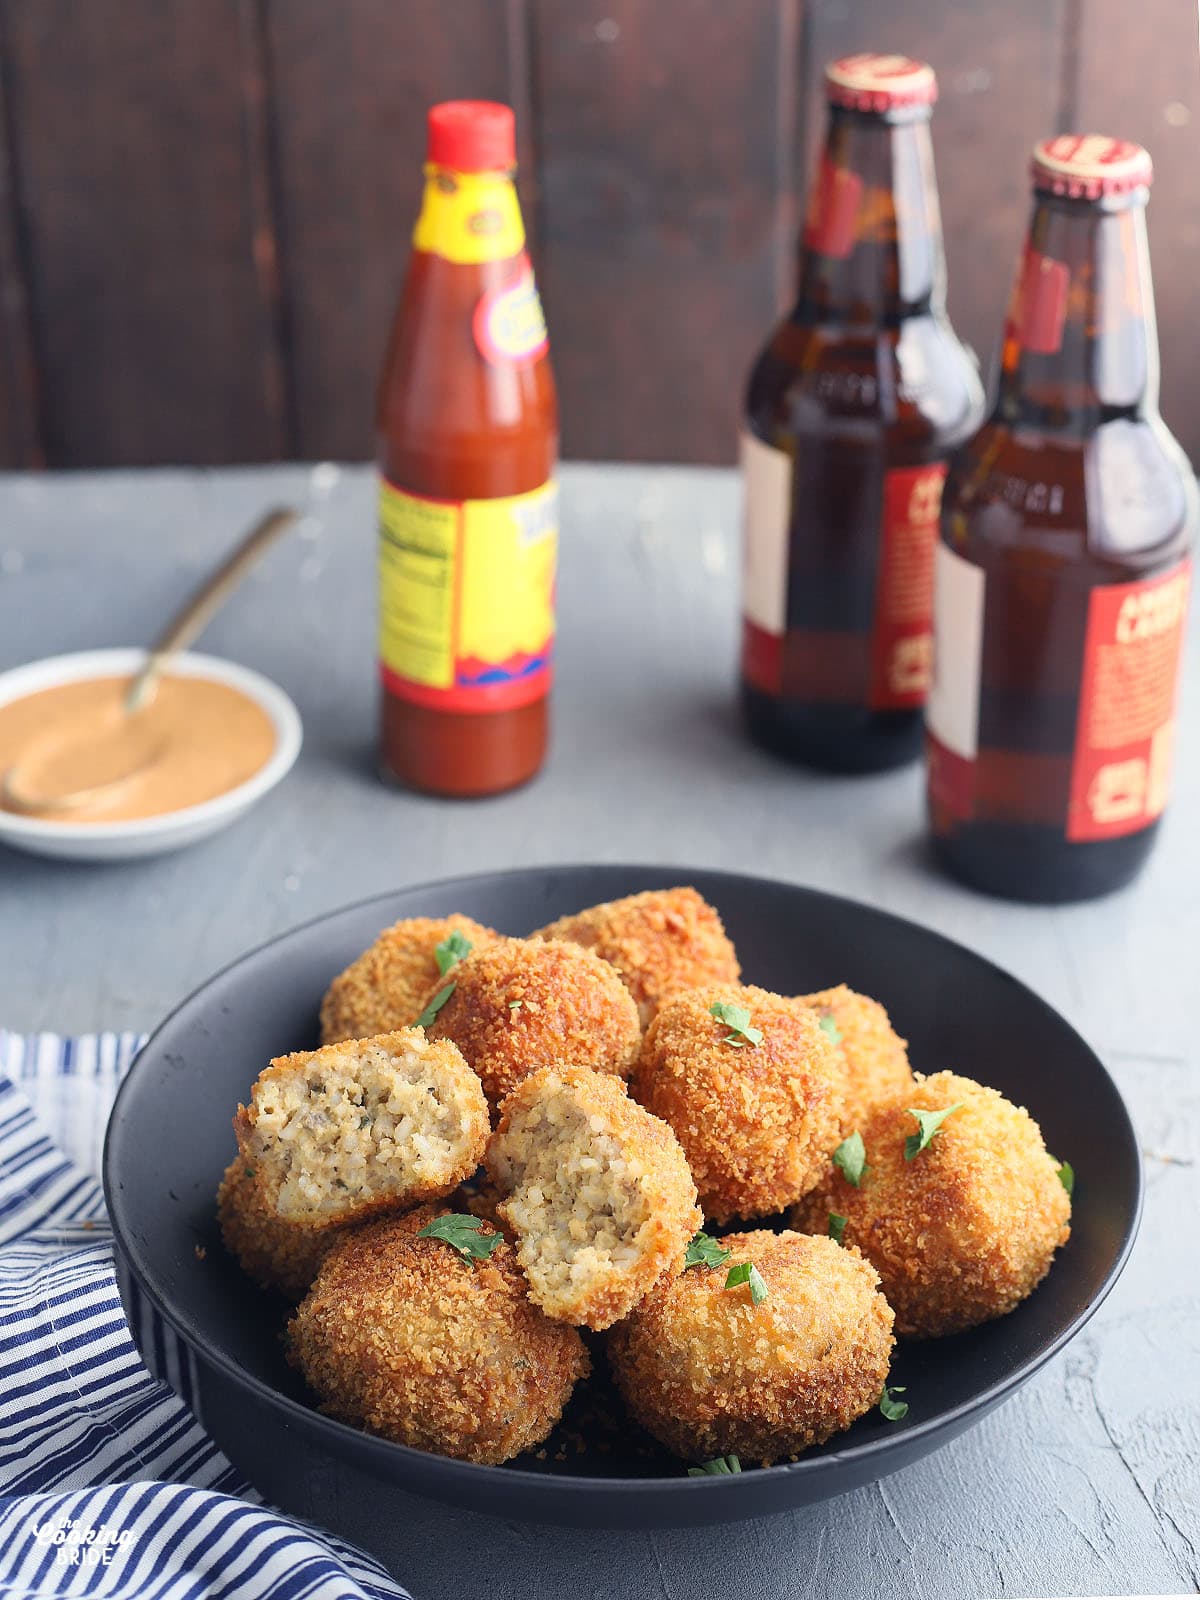 fried boudin balls in a black serving bowl with a small dish of dipping sauce, hot sauce and two bottles of beer in the background